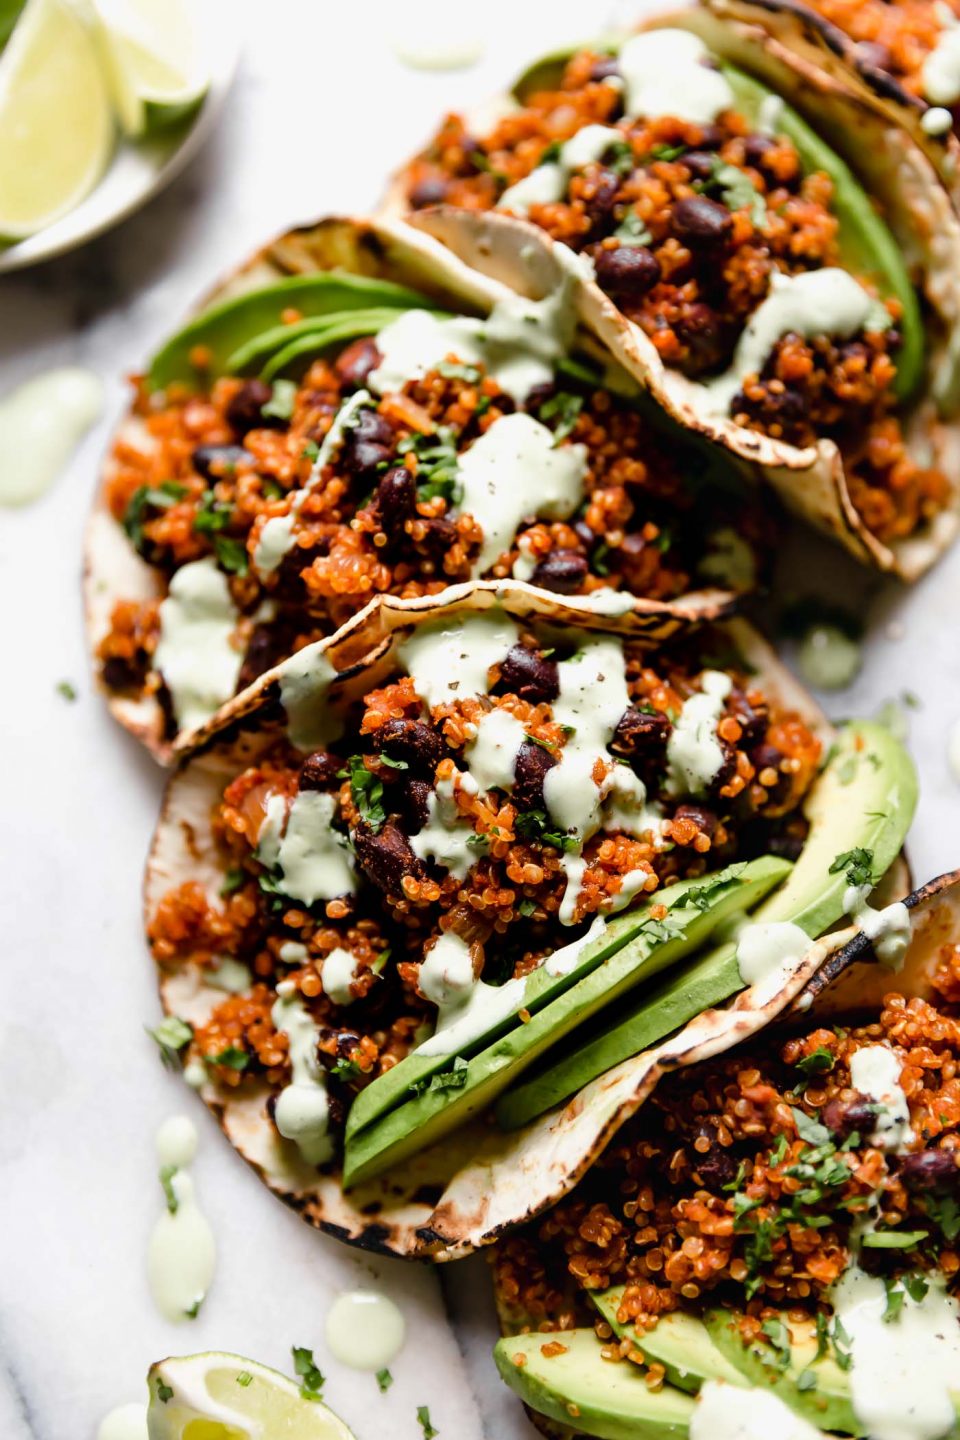 Quinoa Black Bean Tacos arranged on a marble board, topped with cilantro lime crema sauce & chopped cilantro. There are a few lime wedges surrounding the tacos, along with a small blue bowl with the cilantro lime crema.